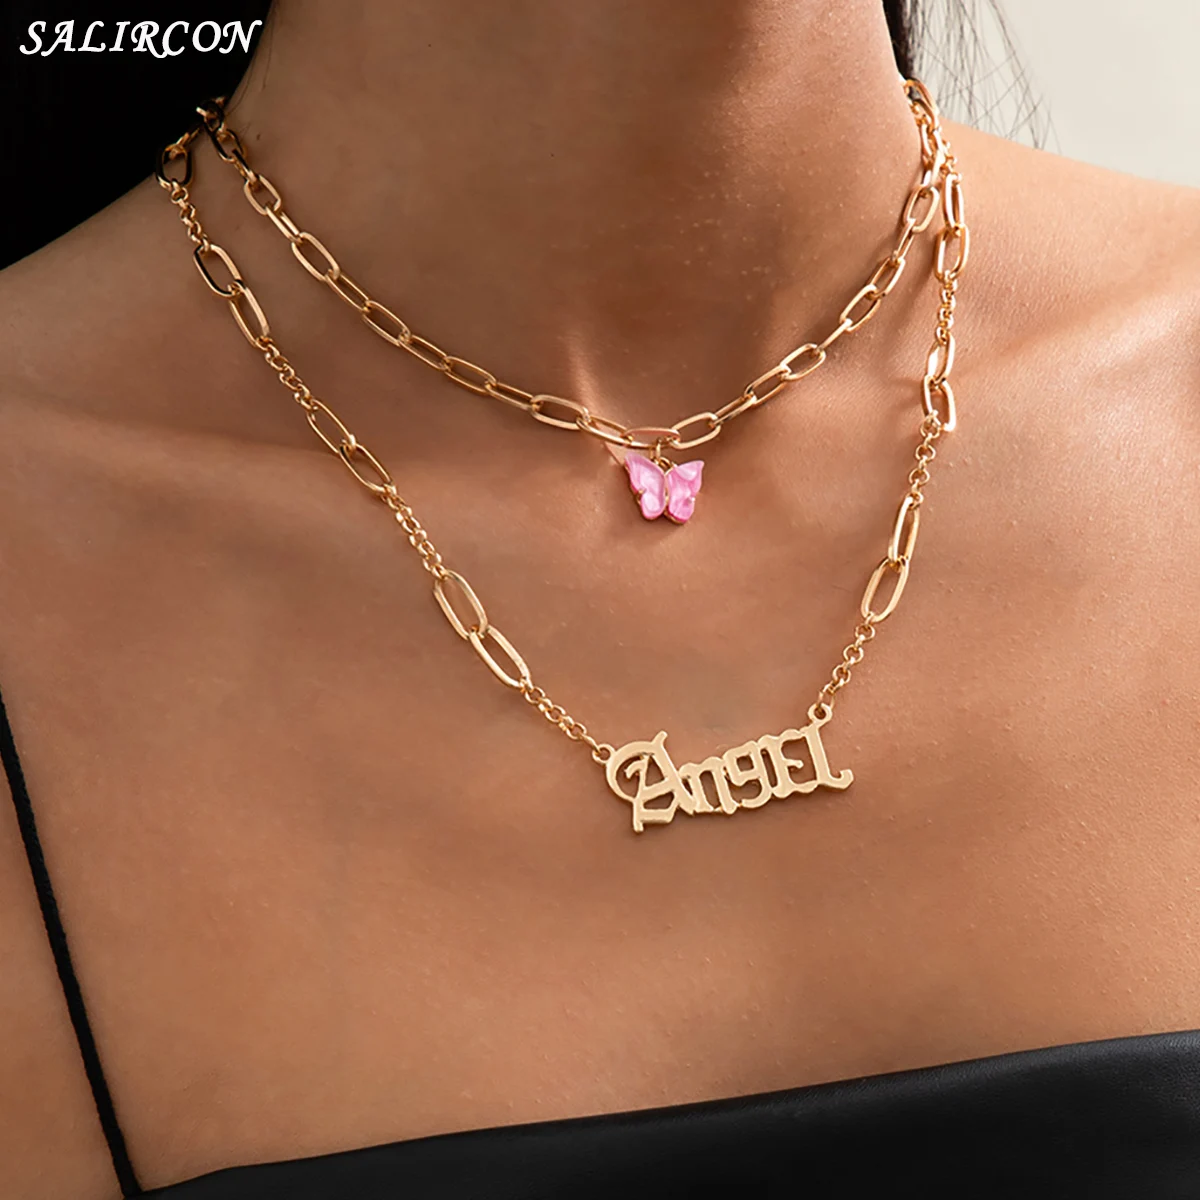 

Vintage Butterfly Angel Letter Pendant Necklace for Women Jewelry Goth Layered Link Chain Necklace Kpop Aesthetic Neck Chains